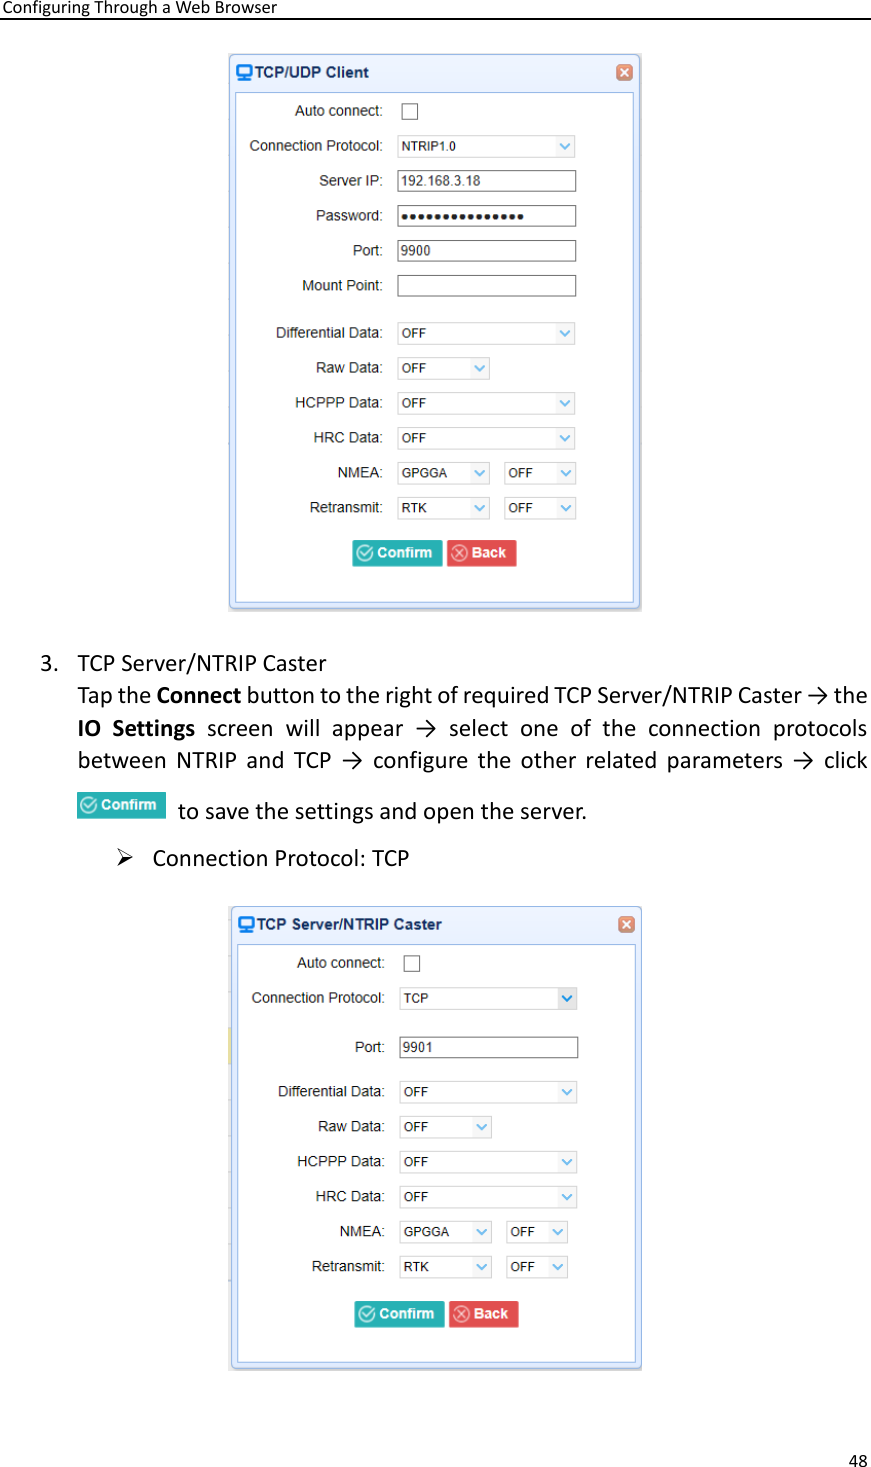 Configuring Through a Web Browser 48   3. TCP Server/NTRIP Caster Tap the Connect button to the right of required TCP Server/NTRIP Caster → the IO  Settings  screen  will  appear  →  select  one  of  the  connection  protocols between  NTRIP  and  TCP  →  configure  the  other  related parameters →  click   to save the settings and open the server. ➢ Connection Protocol: TCP  